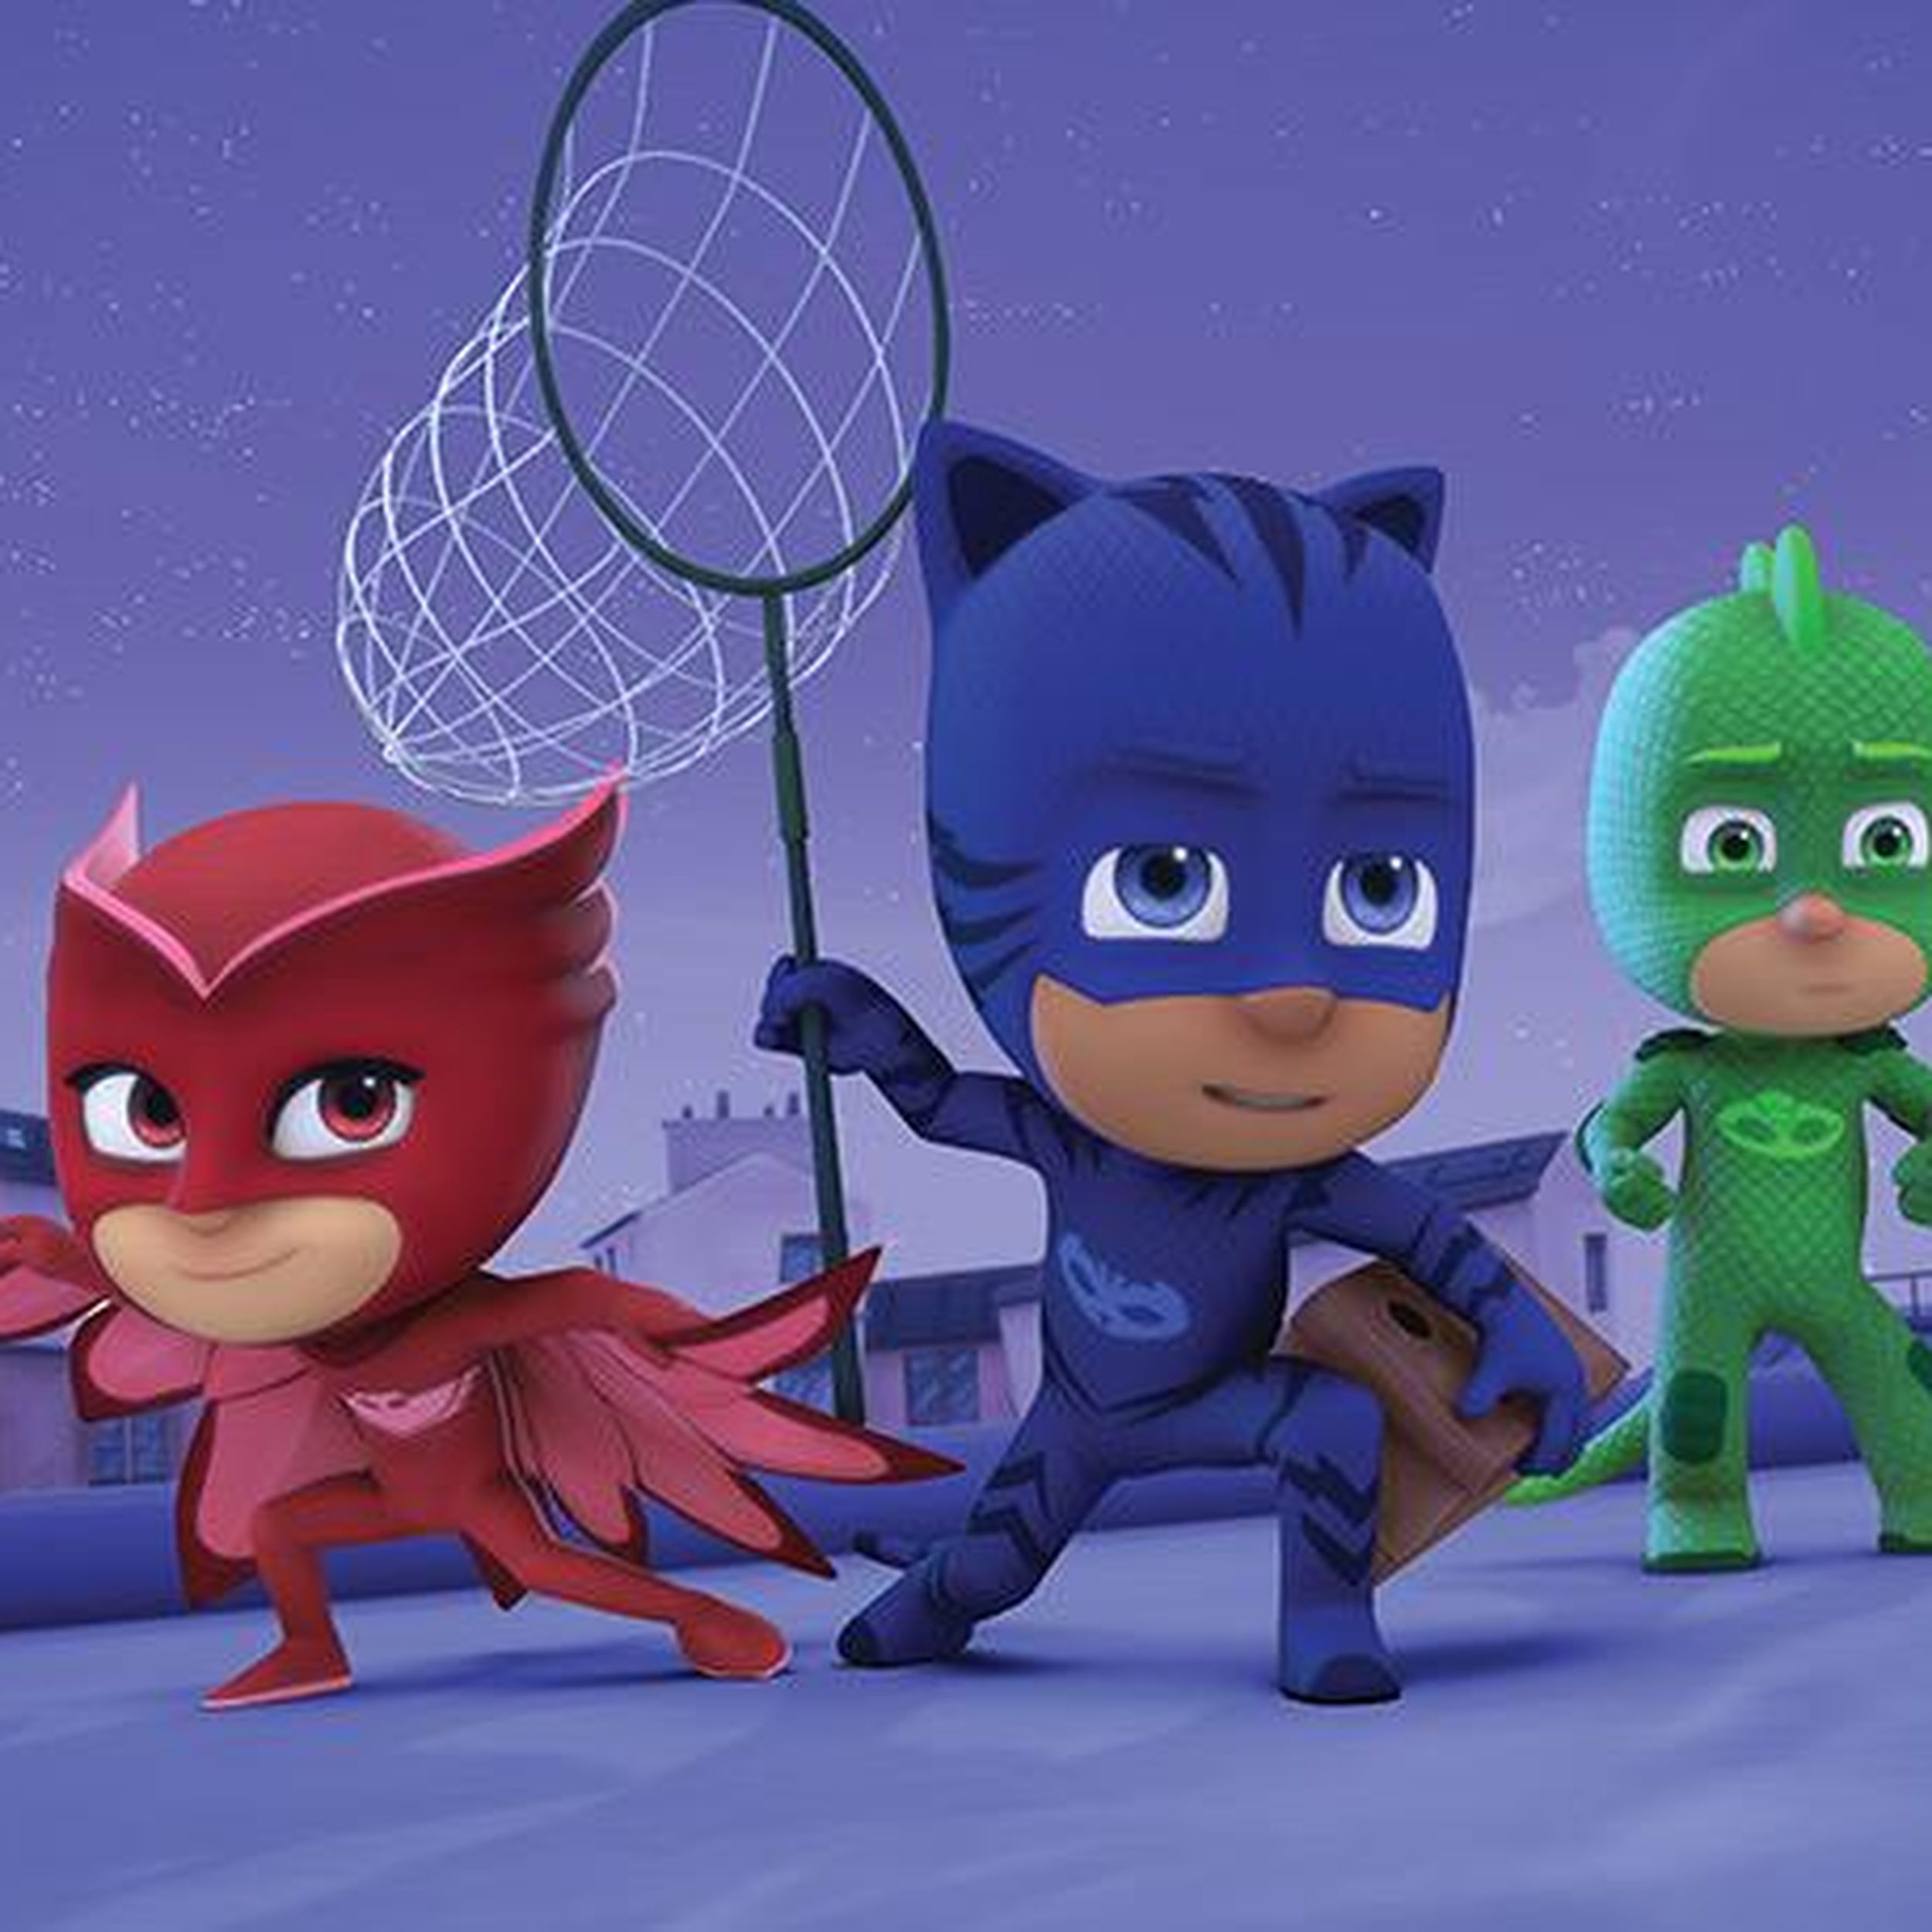 PJ Masks' bring new adventure Spokane Arena in the Day!' | The Spokesman-Review